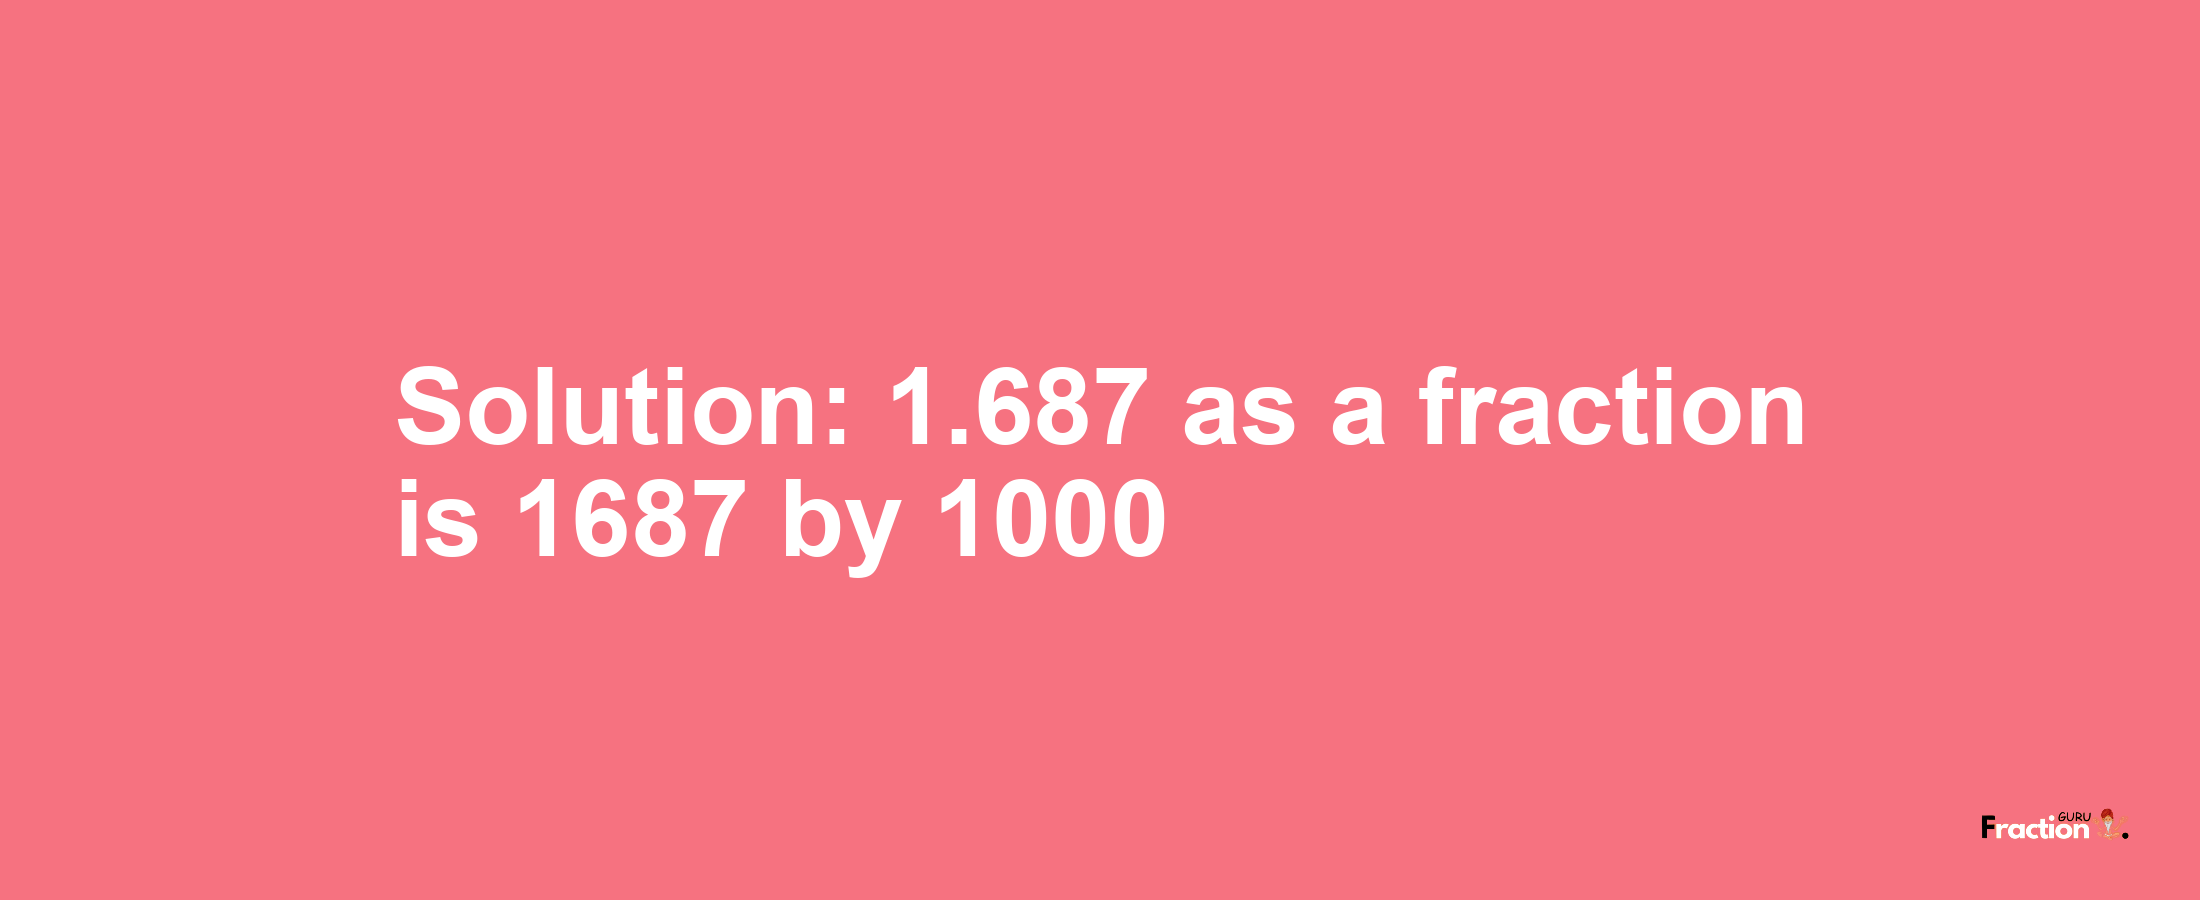 Solution:1.687 as a fraction is 1687/1000